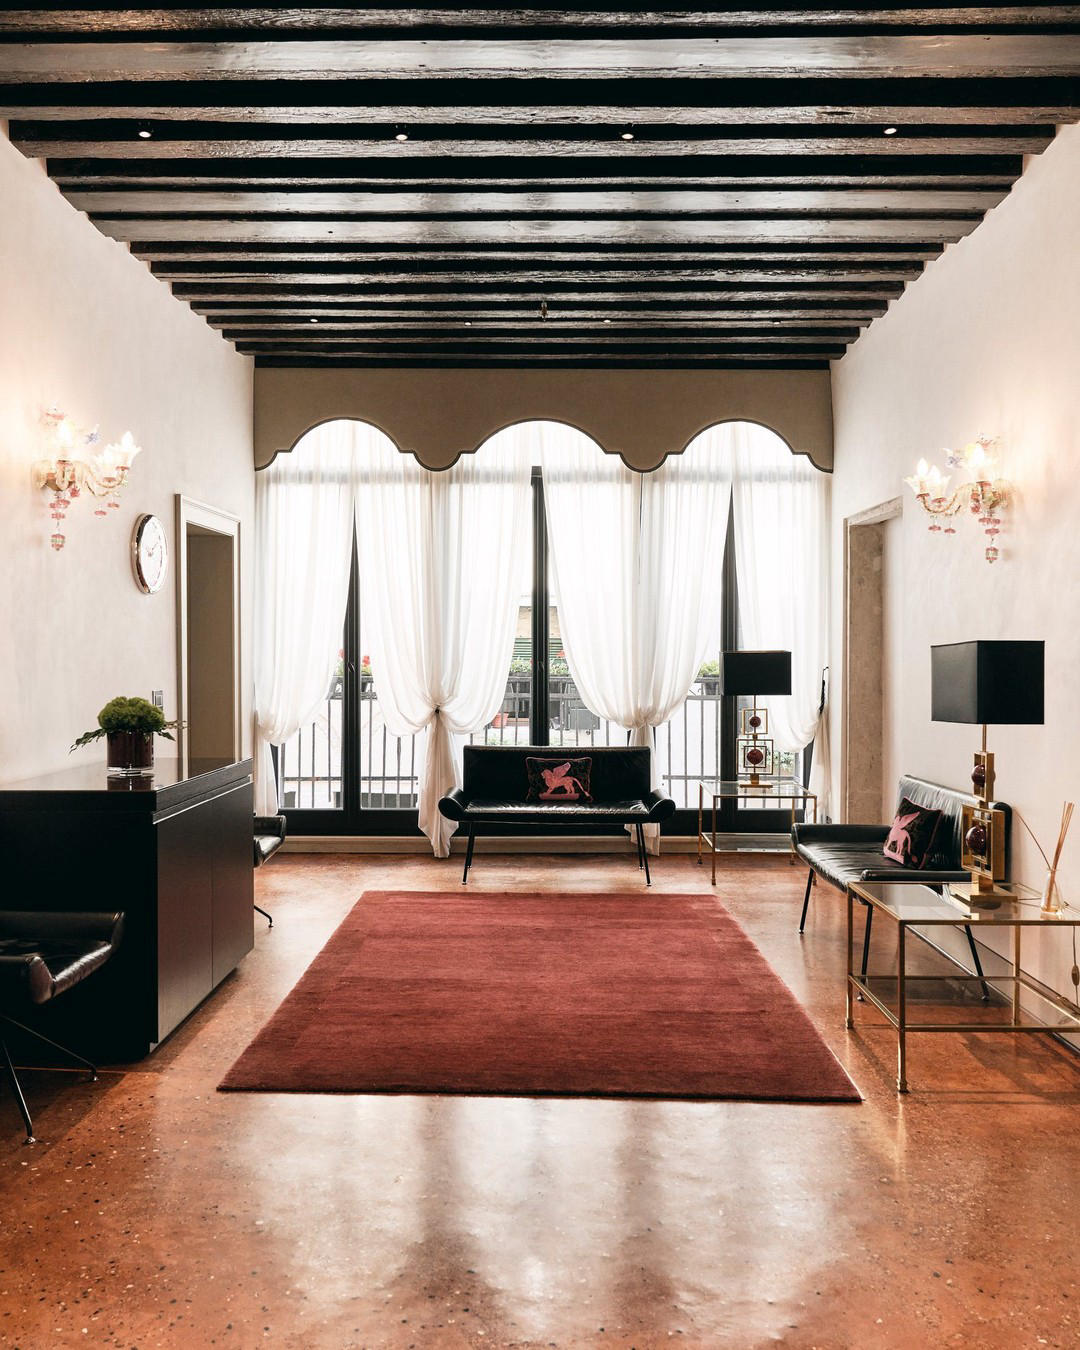 image  1 Hotel L'Orologio Venice - The interior architecture of our structure in typical Venetian style, with